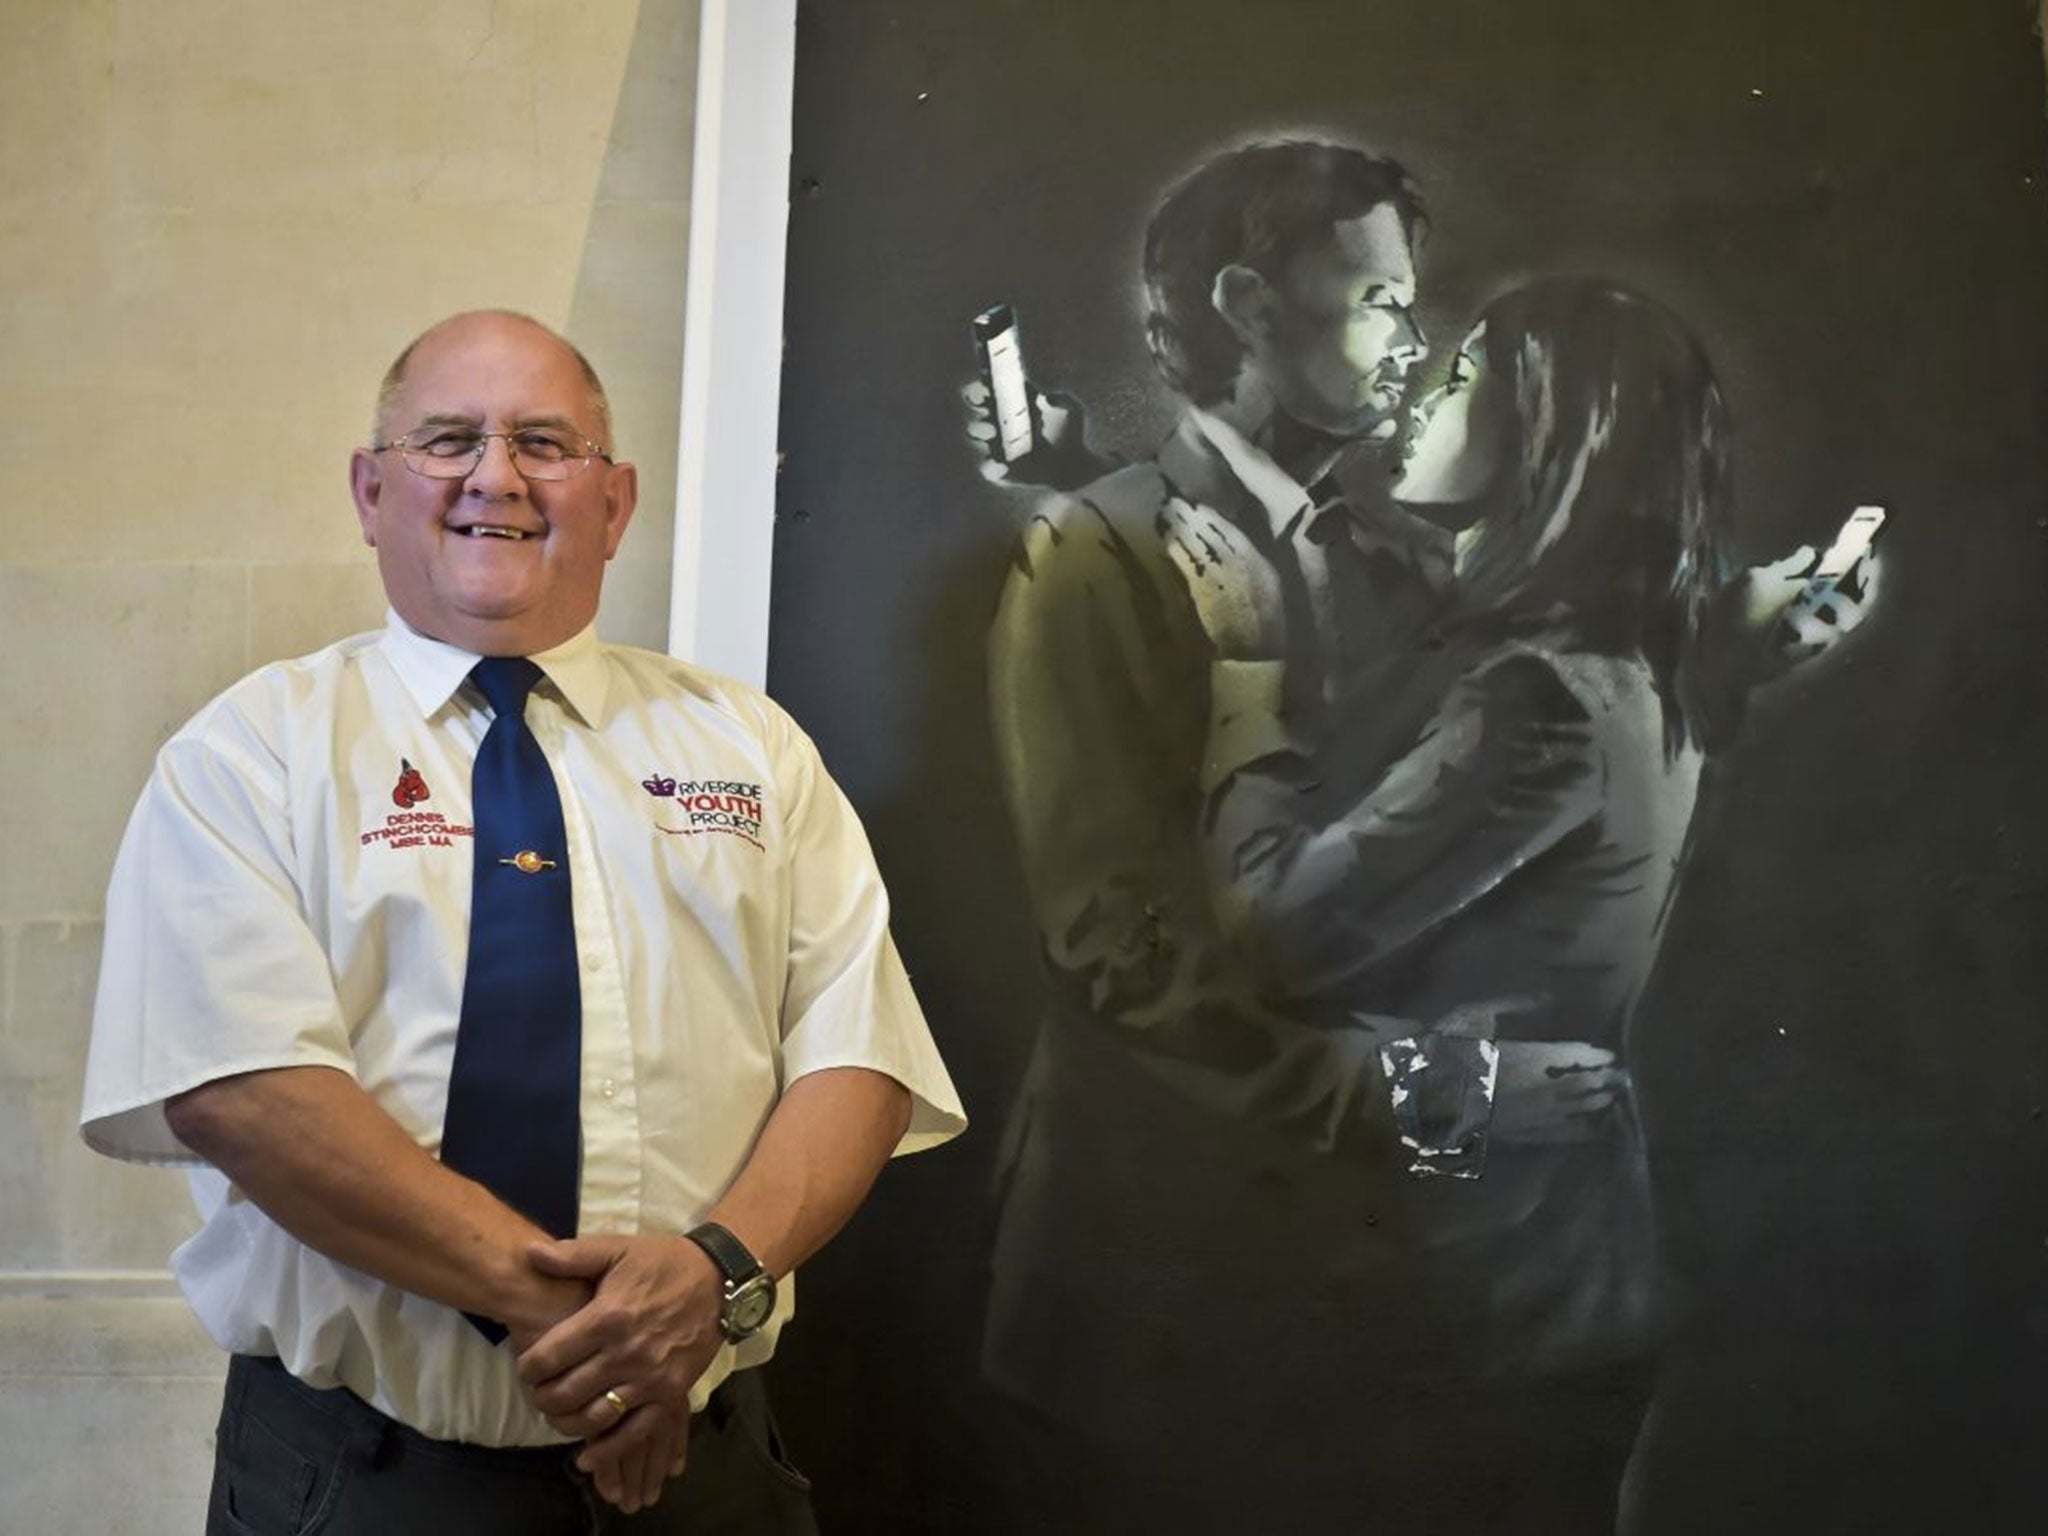 Dennis Stinchcombe, of Broad Plain Boys' Club in Bristol, by a Banksy artwork, titled 'Mobile Lovers', where the sale and handover have been completed at the Bristol Museum & Art Gallery, where it was on display to the public.